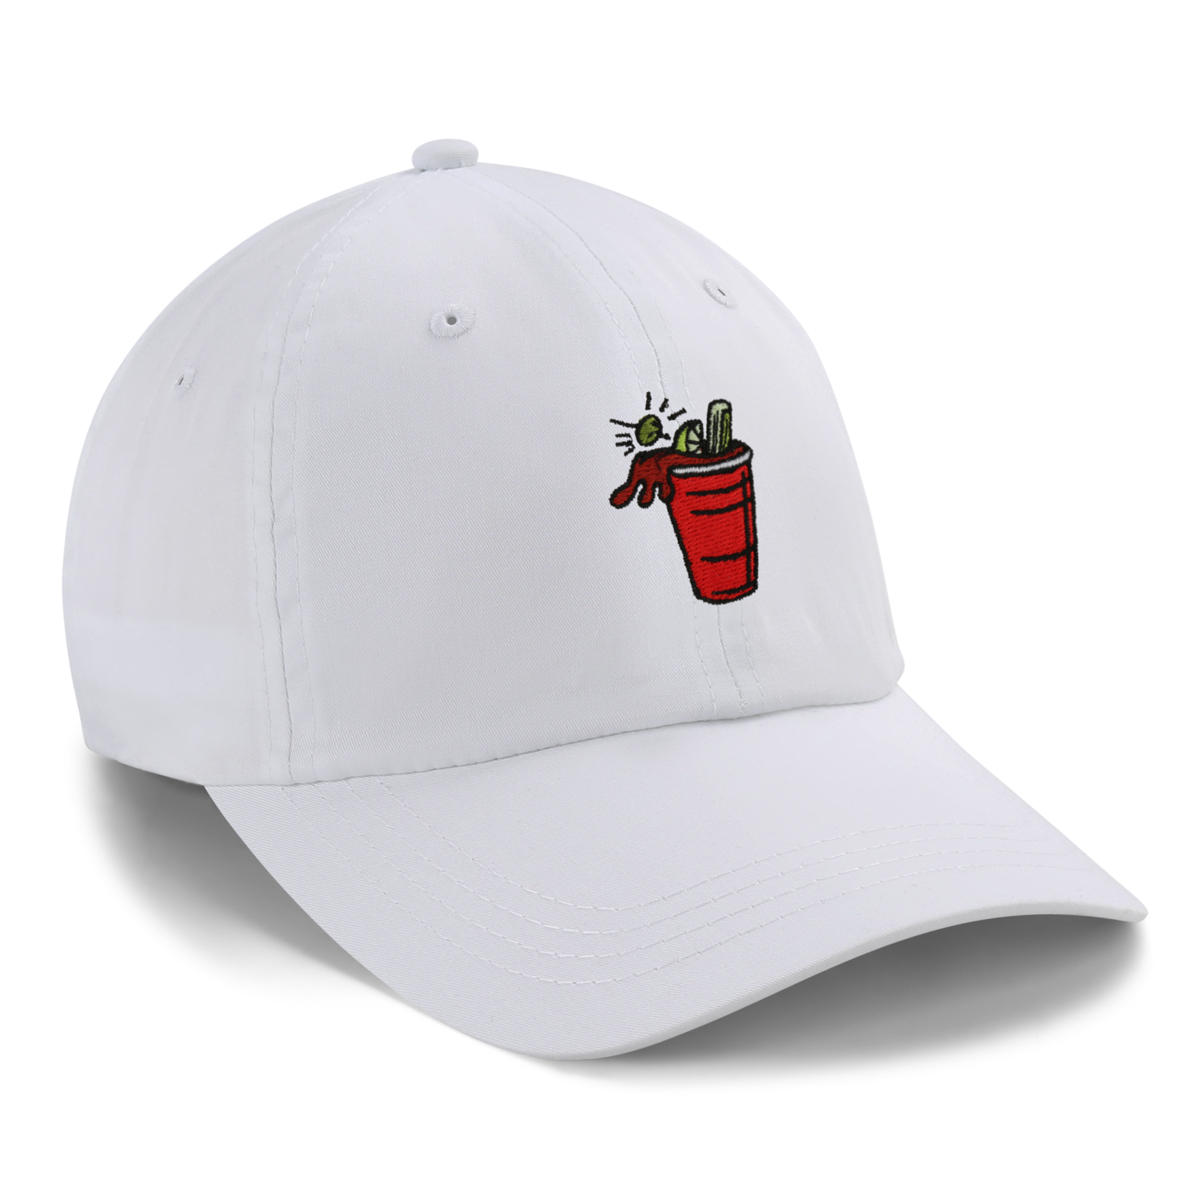 Bloody Mary by Seth McWhorter - Lightweight Cotton Cap